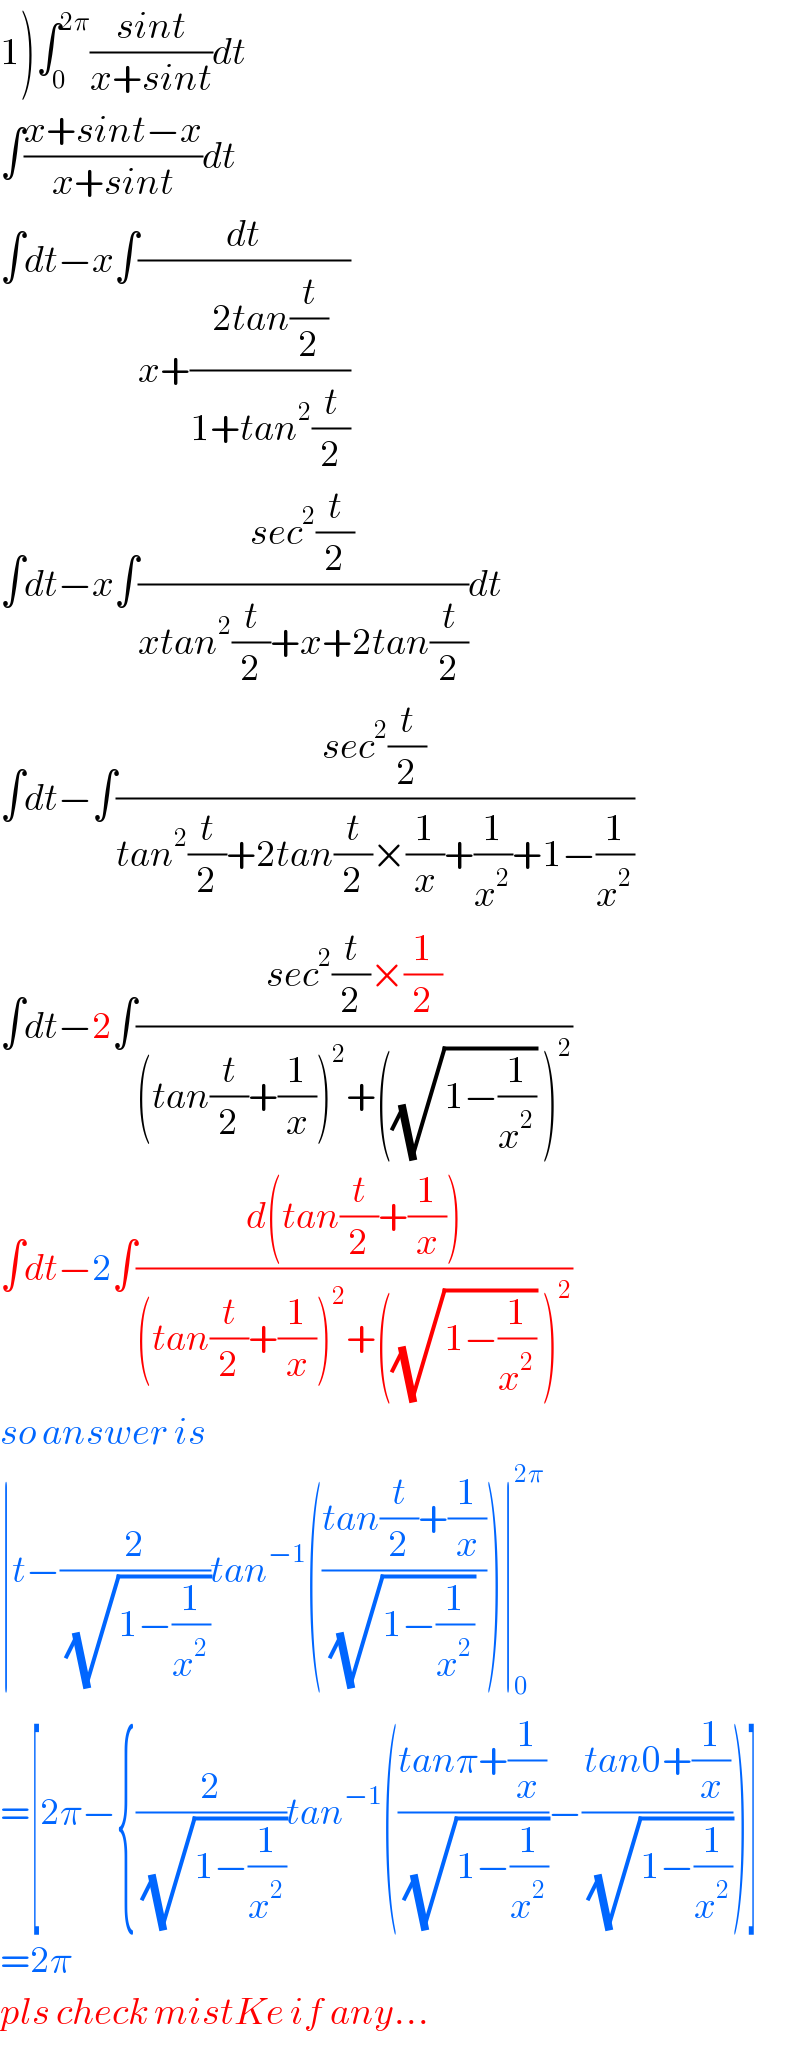 1)∫_0 ^(2π) ((sint)/(x+sint))dt  ∫((x+sint−x)/(x+sint))dt  ∫dt−x∫(dt/(x+((2tan(t/2))/(1+tan^2 (t/2)))))  ∫dt−x∫((sec^2 (t/2))/(xtan^2 (t/2)+x+2tan(t/2)))dt  ∫dt−∫((sec^2 (t/2))/(tan^2 (t/2)+2tan(t/2)×(1/x)+(1/x^2 )+1−(1/x^2 )))  ∫dt−2∫((sec^2 (t/2)×(1/2))/((tan(t/2)+(1/x))^2 +((√(1−(1/x^2 ))) )^2 ))   ∫dt−2∫((d(tan(t/2)+(1/x)))/((tan(t/2)+(1/x))^2 +((√(1−(1/x^2 ))) )^2 ))  so answer is  ∣t−(2/(√(1−(1/x^2 ))))tan^(−1) (((tan(t/2)+(1/x))/((√(1−(1/x^2 ))) )))∣_0 ^(2π)   =[2π−{(2/(√(1−(1/x^2 ))))tan^(−1) (((tanπ+(1/x))/(√(1−(1/x^2 ))))−((tan0+(1/x))/(√(1−(1/x^2 )))))]  =2π  pls check mistKe if any...  